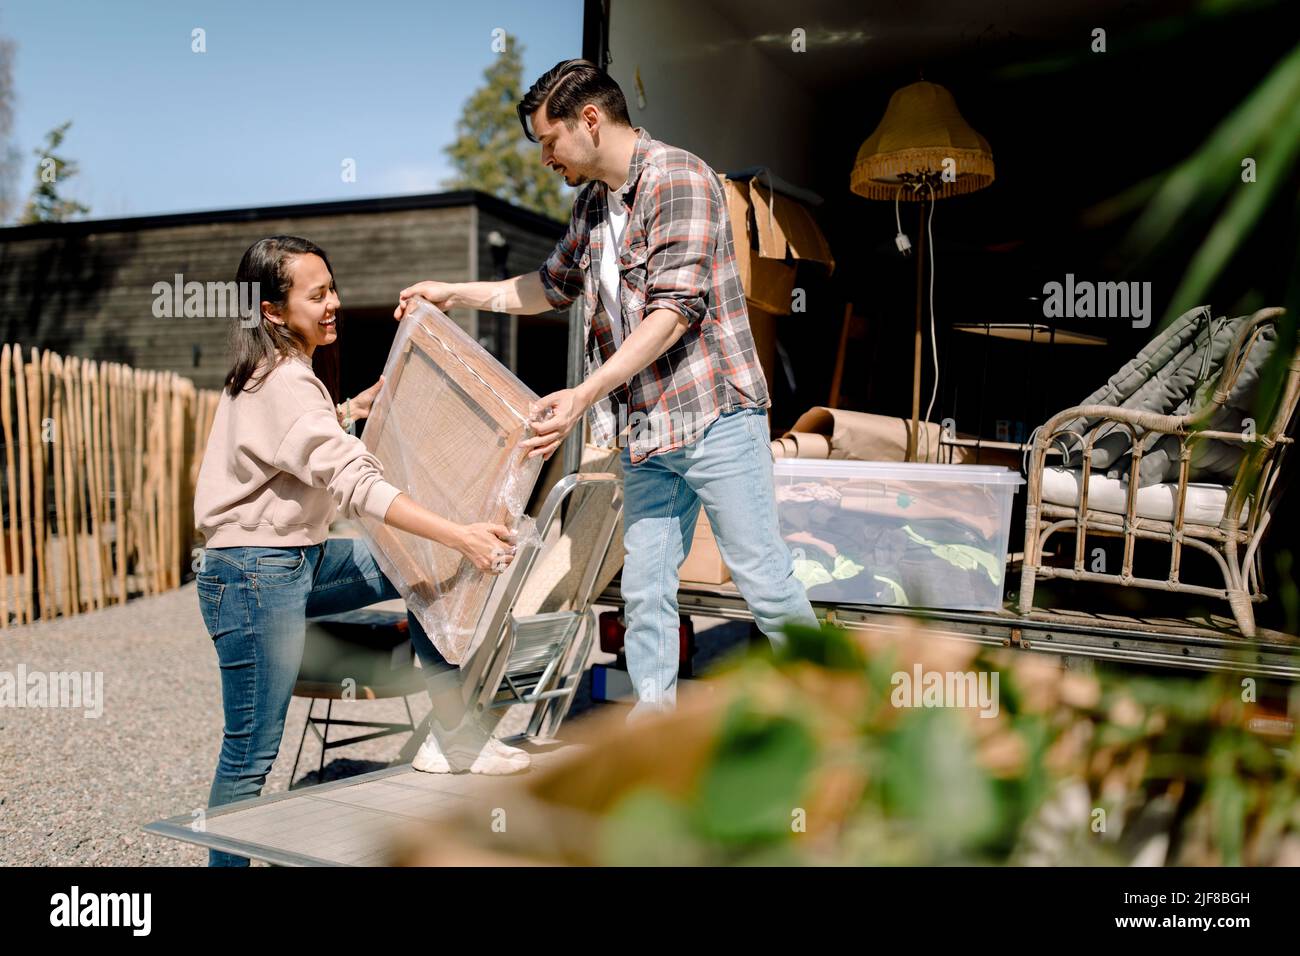 Man and woman unloading painting from truck during sunny day Stock Photo